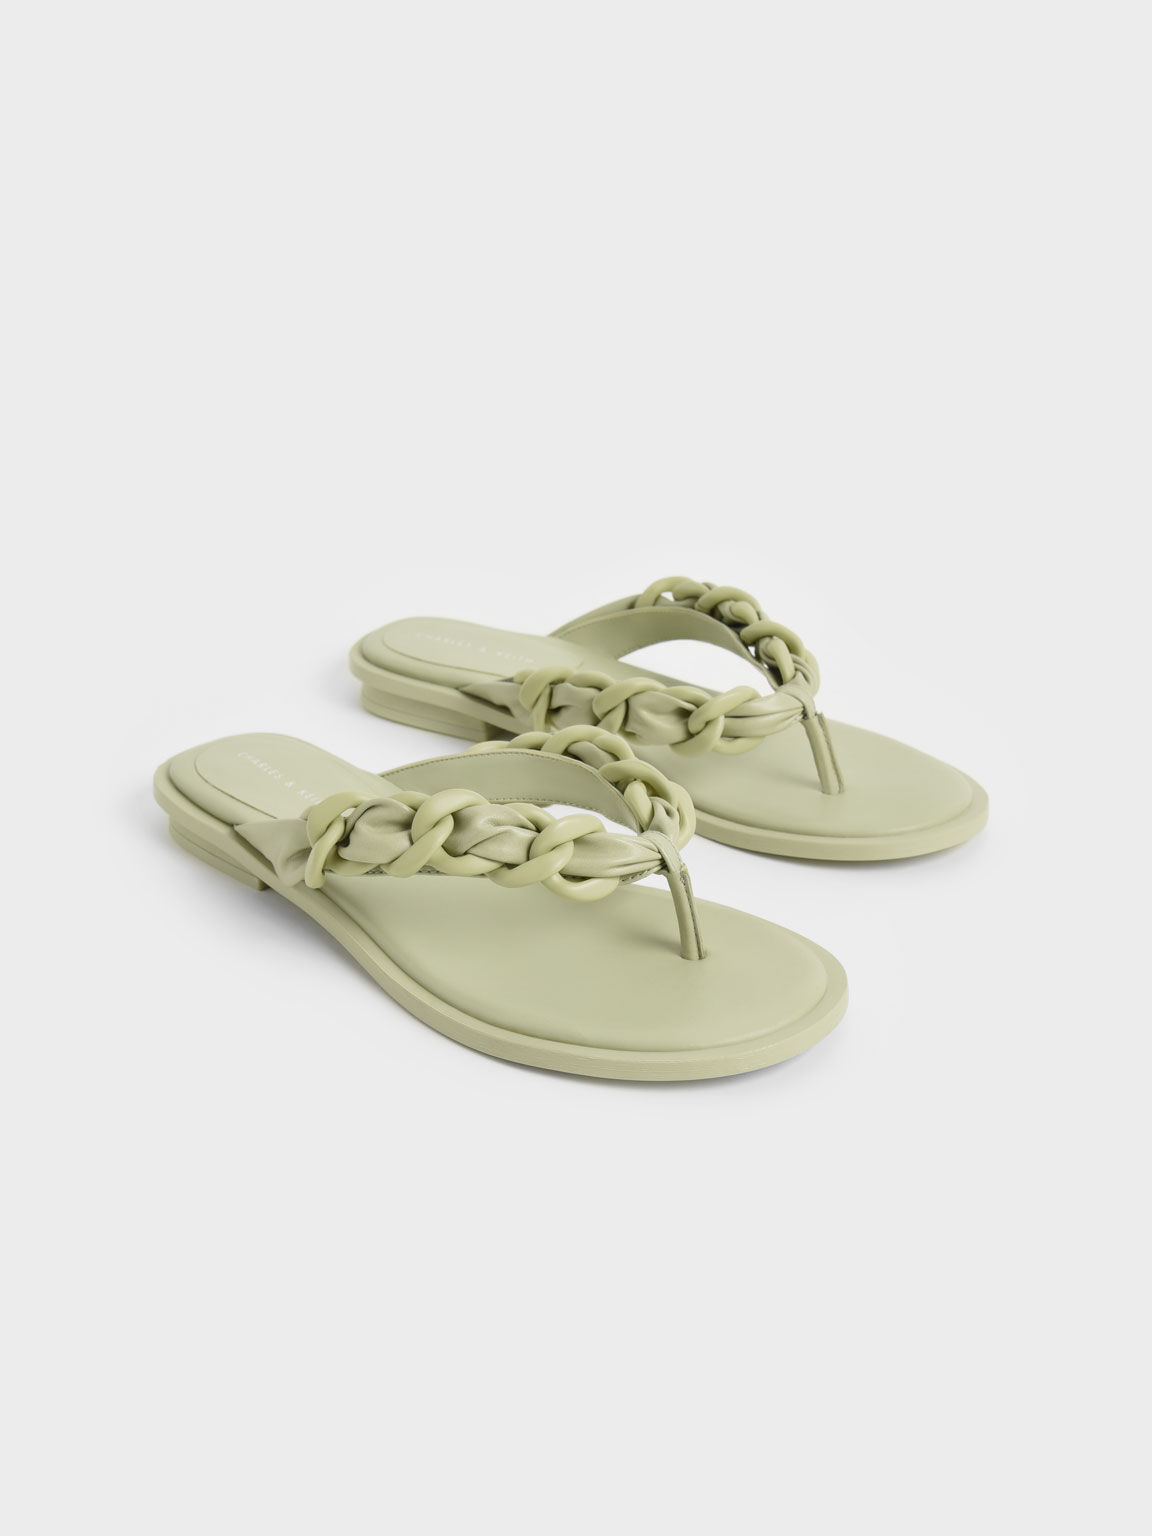 Braided Chain-Link Strap Thong Sandals, Sage Green, hi-res